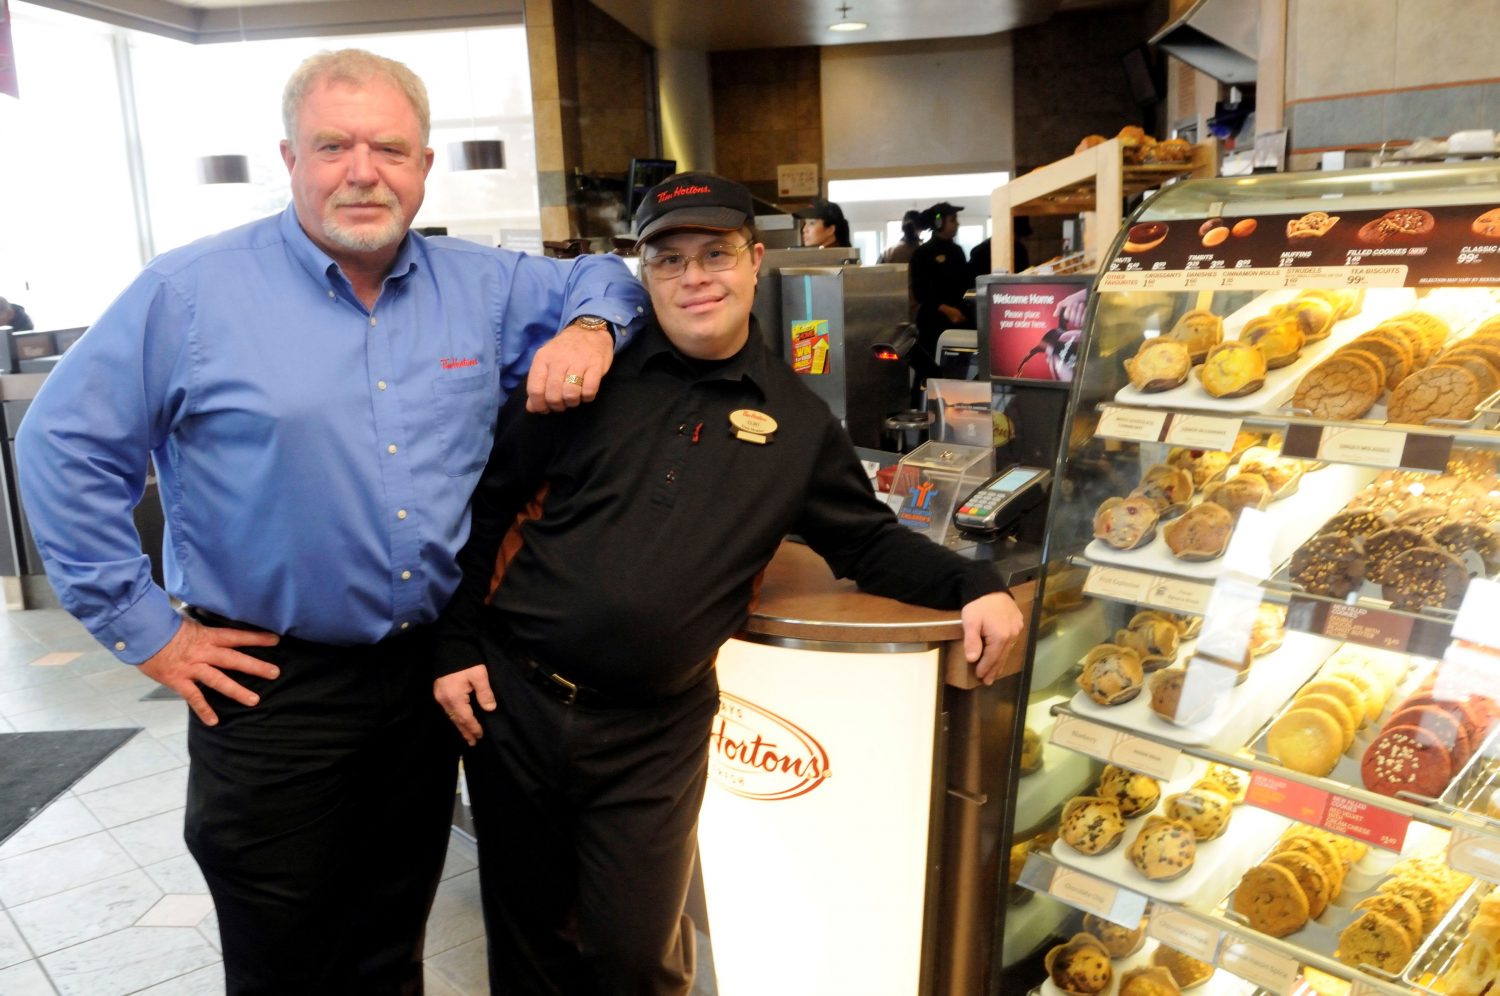 Employee with Down syndrome and his boss at Tim Hortons